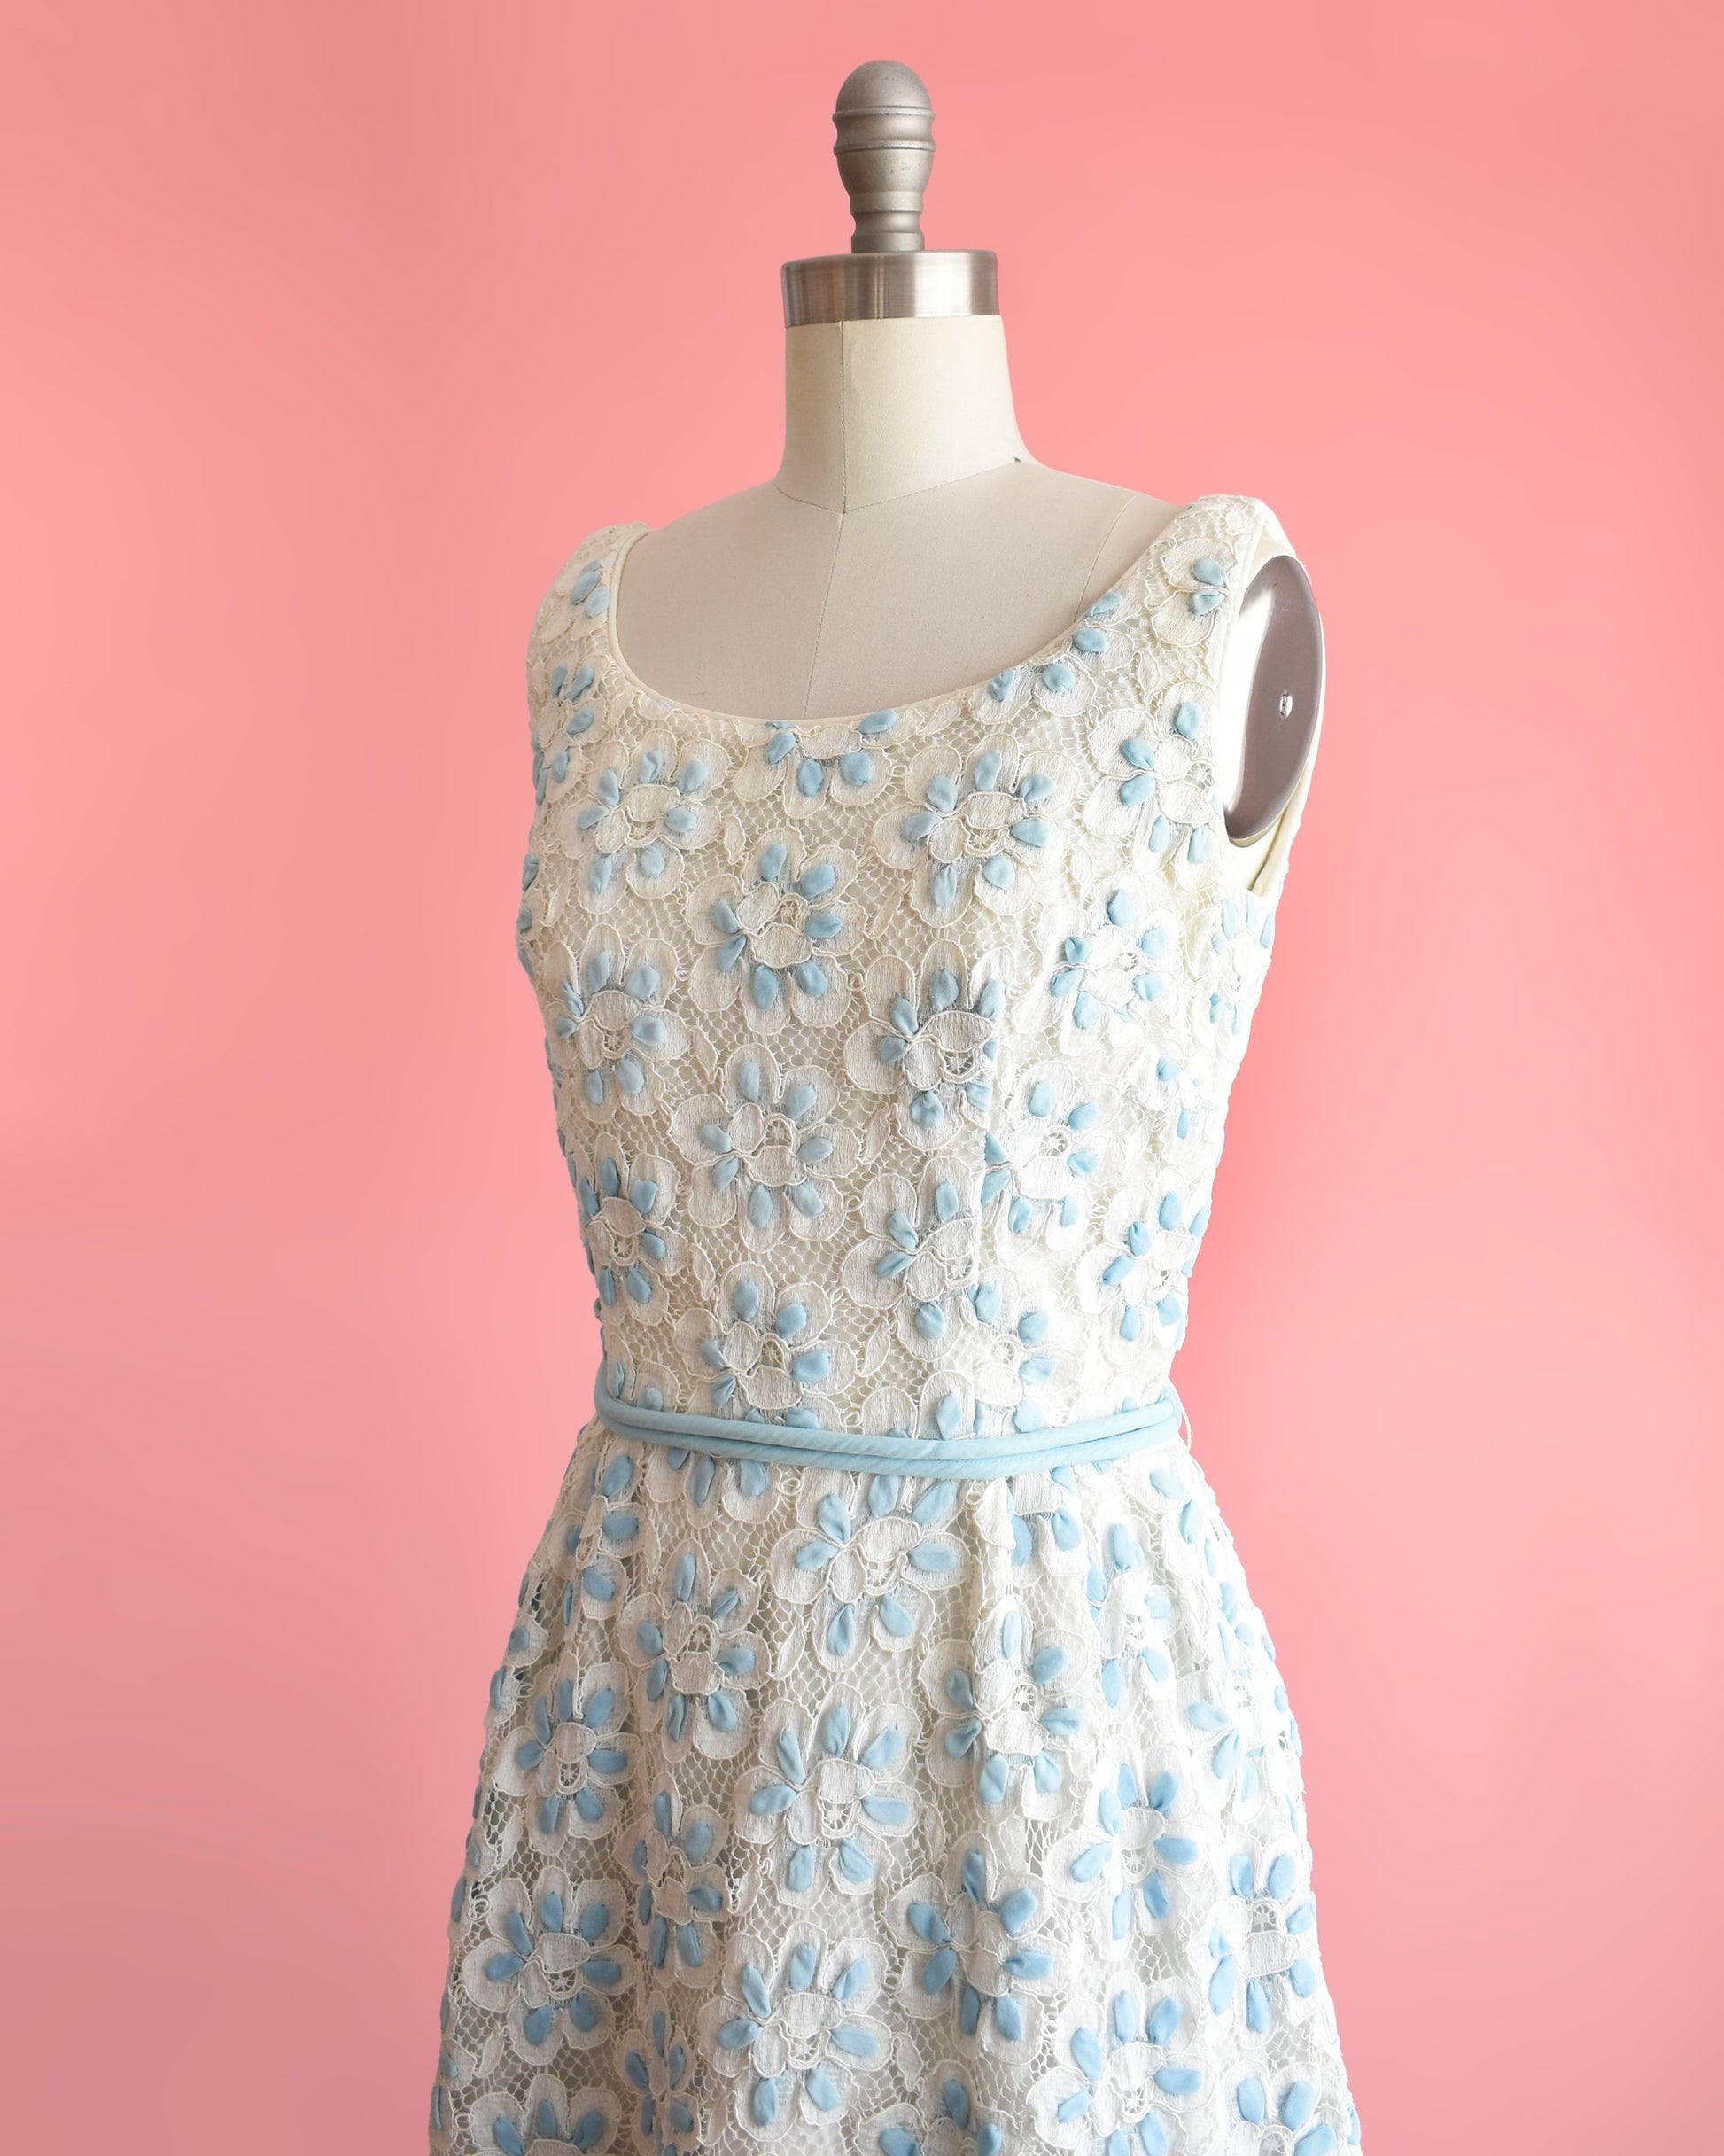 Side front view of a vintage 60s white and blue floral lace dress that is sleeveless with a scoop neckline. Fitted waist with a matching double blue rope tie belt. Flared out skirt. Dress is modeled on a dress form